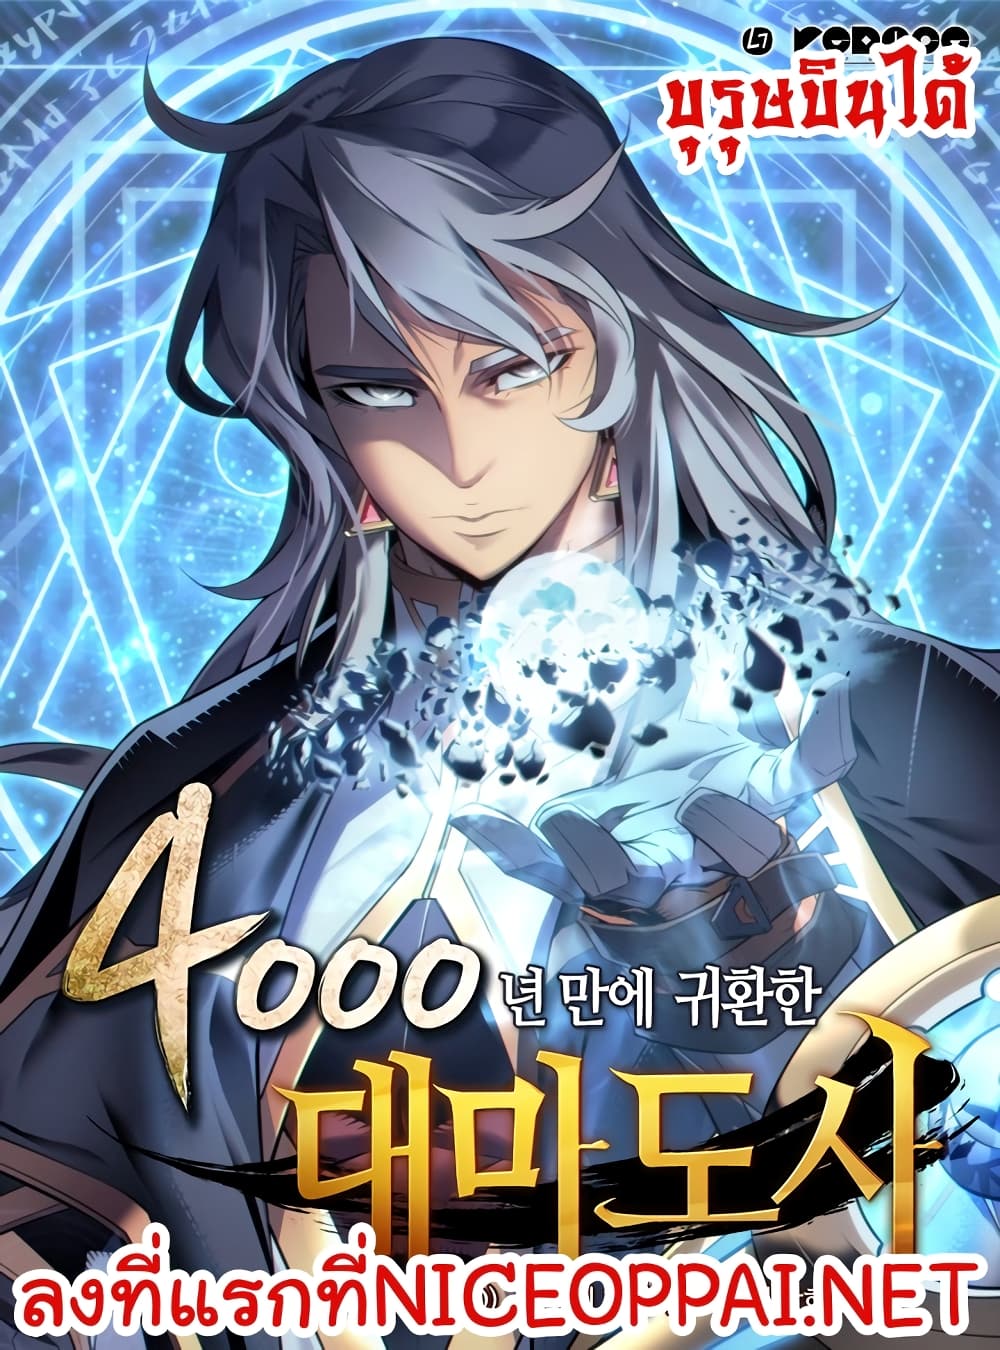 The Great Mage Returns After 4000 Years 41 (1)